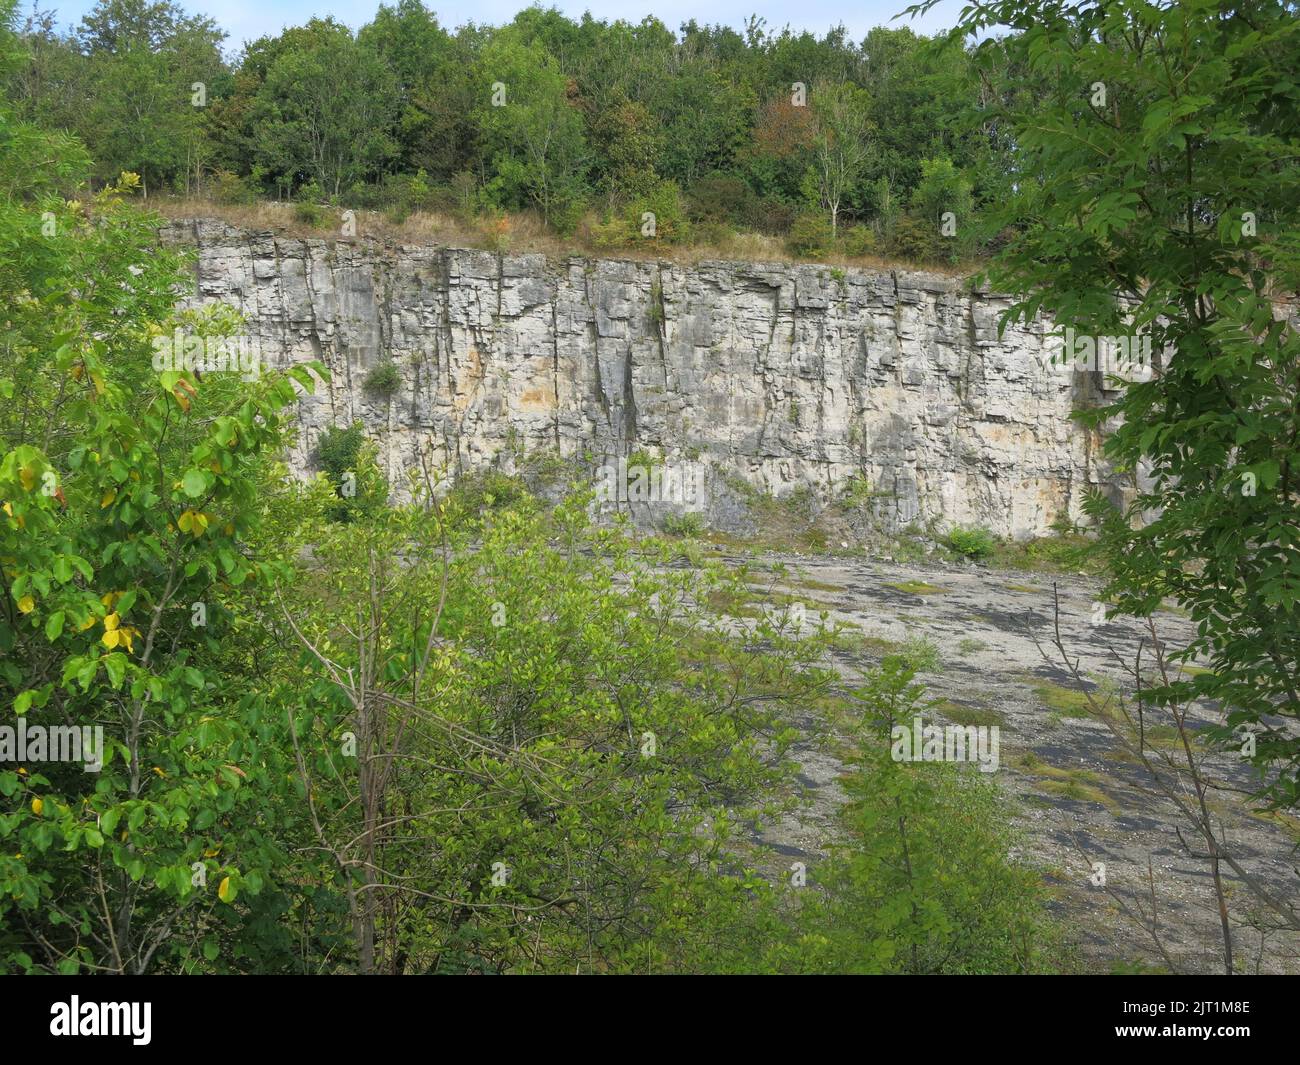 Set within former limestone quarries on the edge of the Peak District, the quarry face is clearly visible with its geological ages of rock formations. Stock Photo